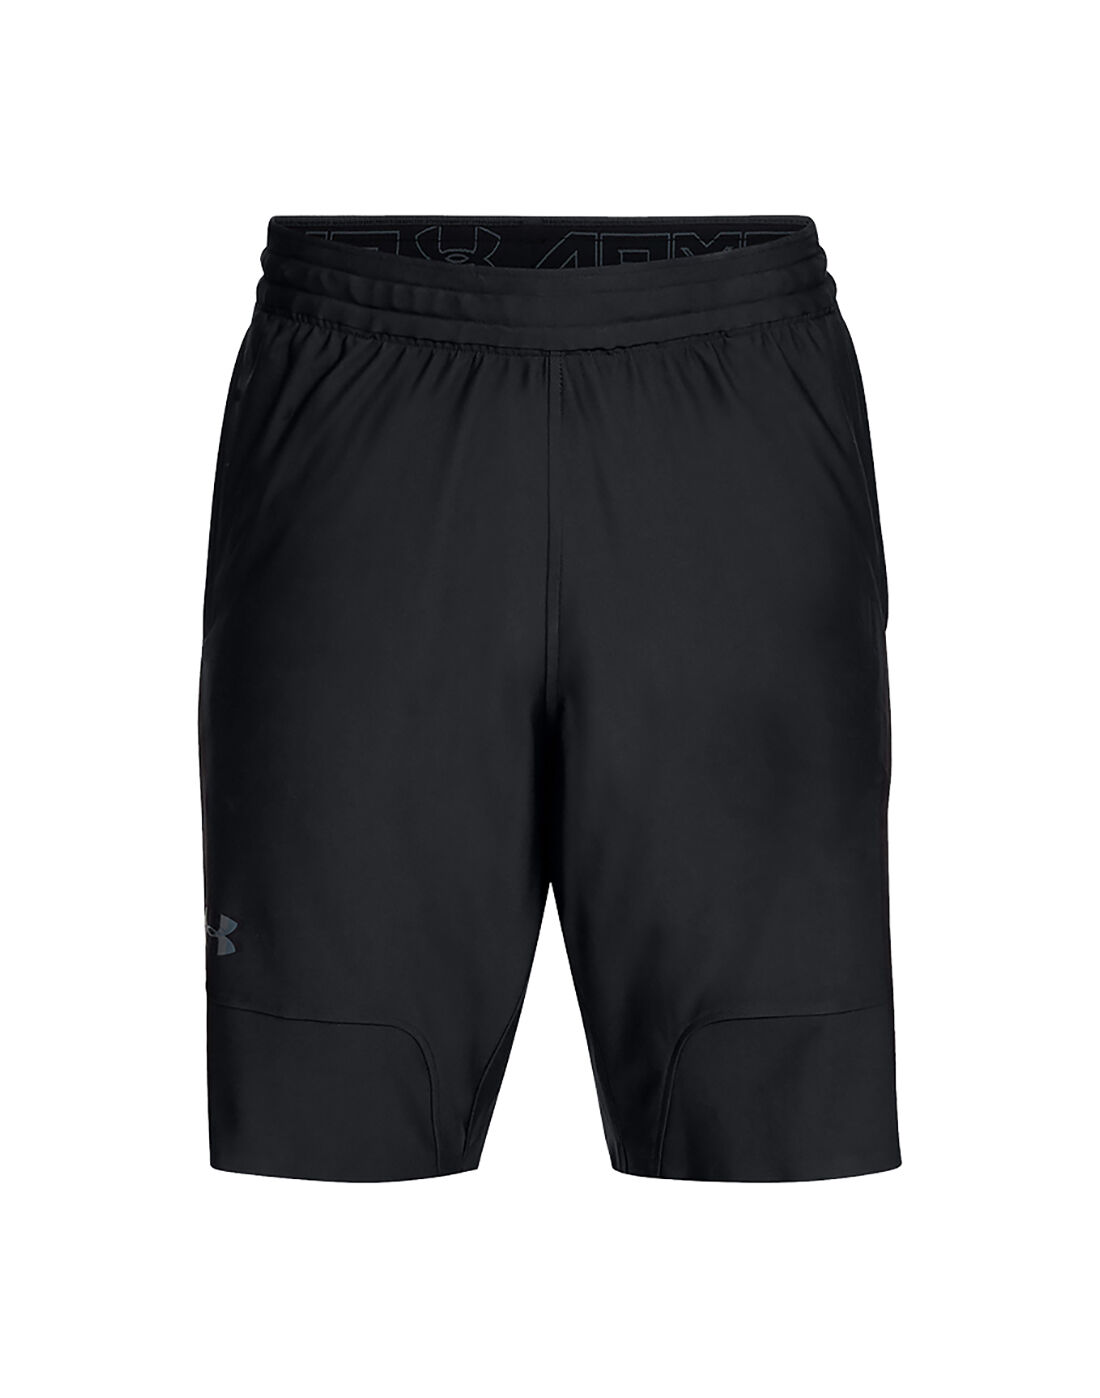 under armour fitted shorts